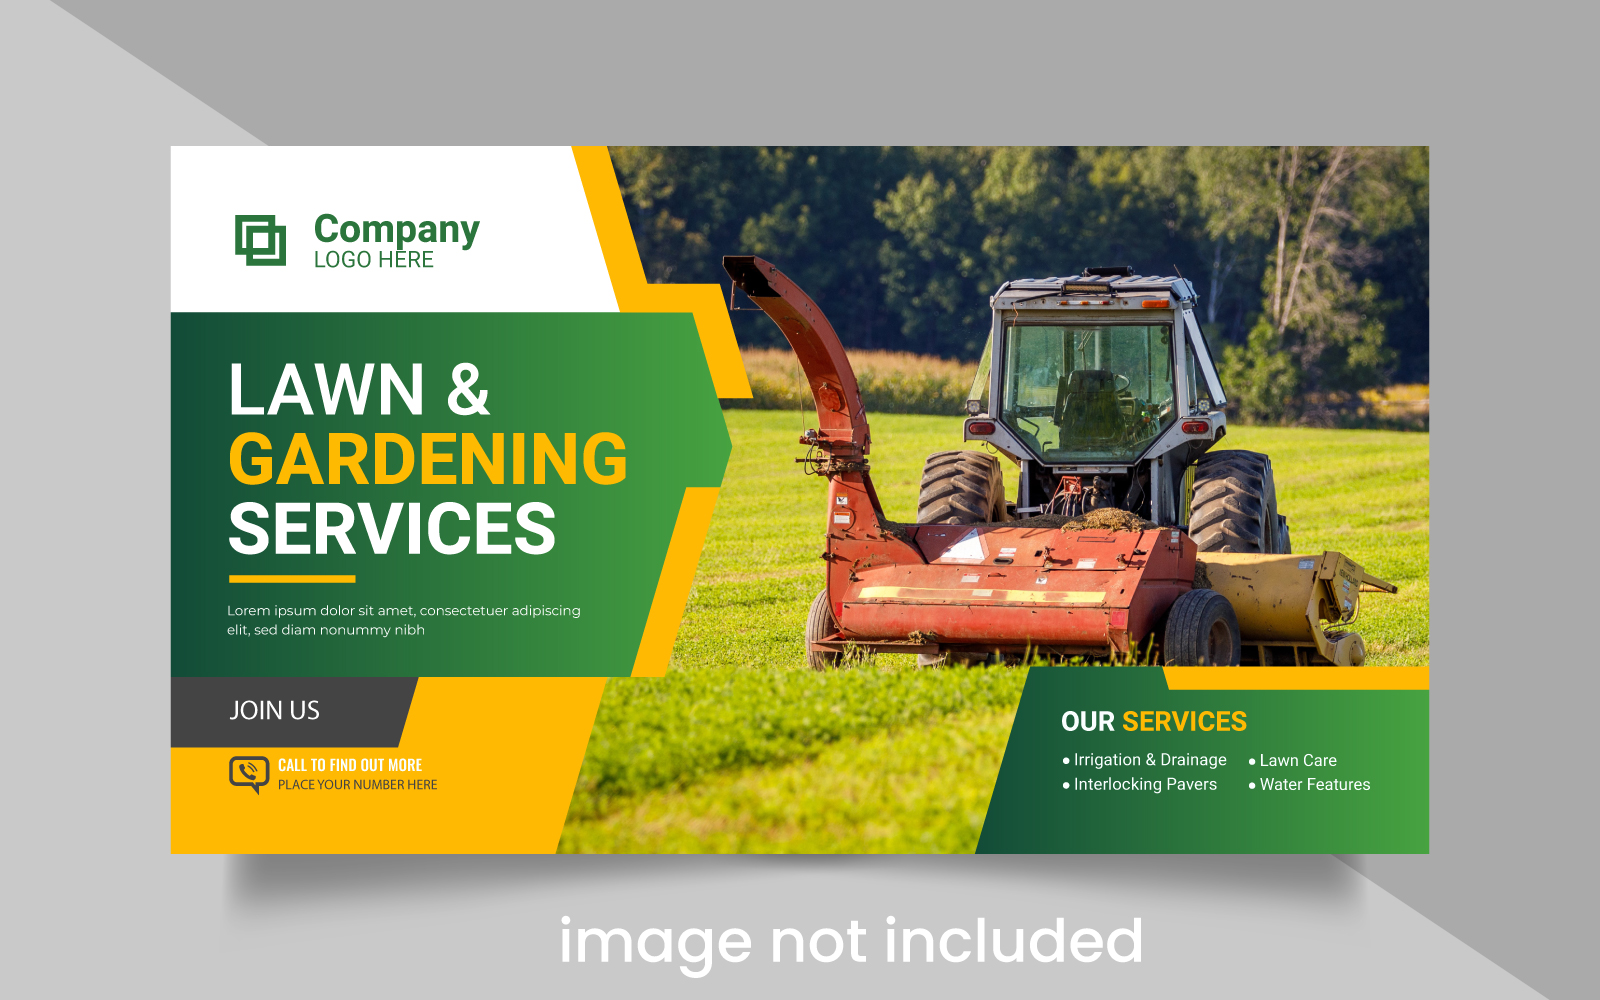 Agro farm and landscaping business web banner design